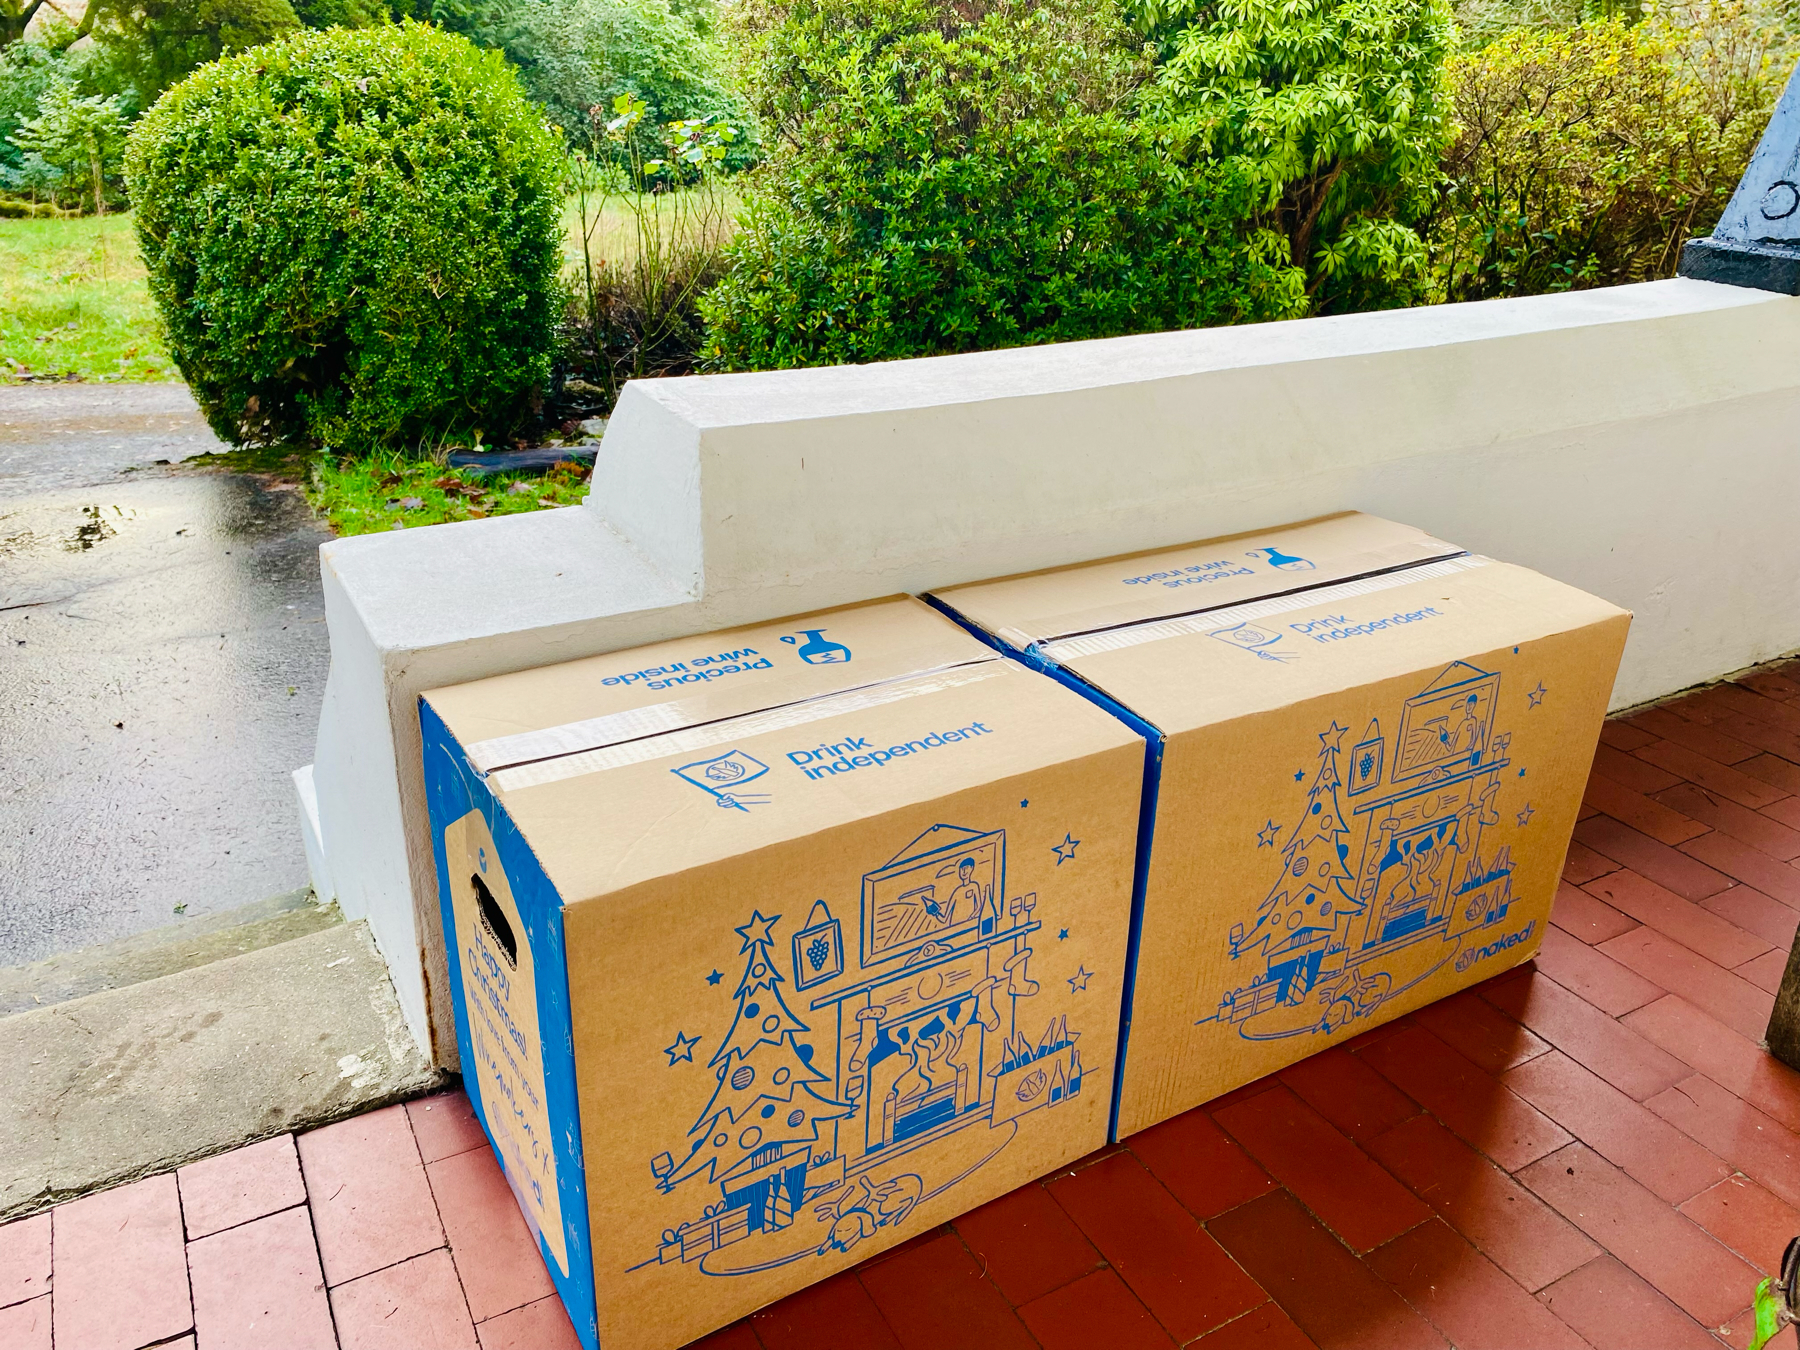 Two large cardboard boxes delivered and placed on a porch with plant-filled garden in the background.